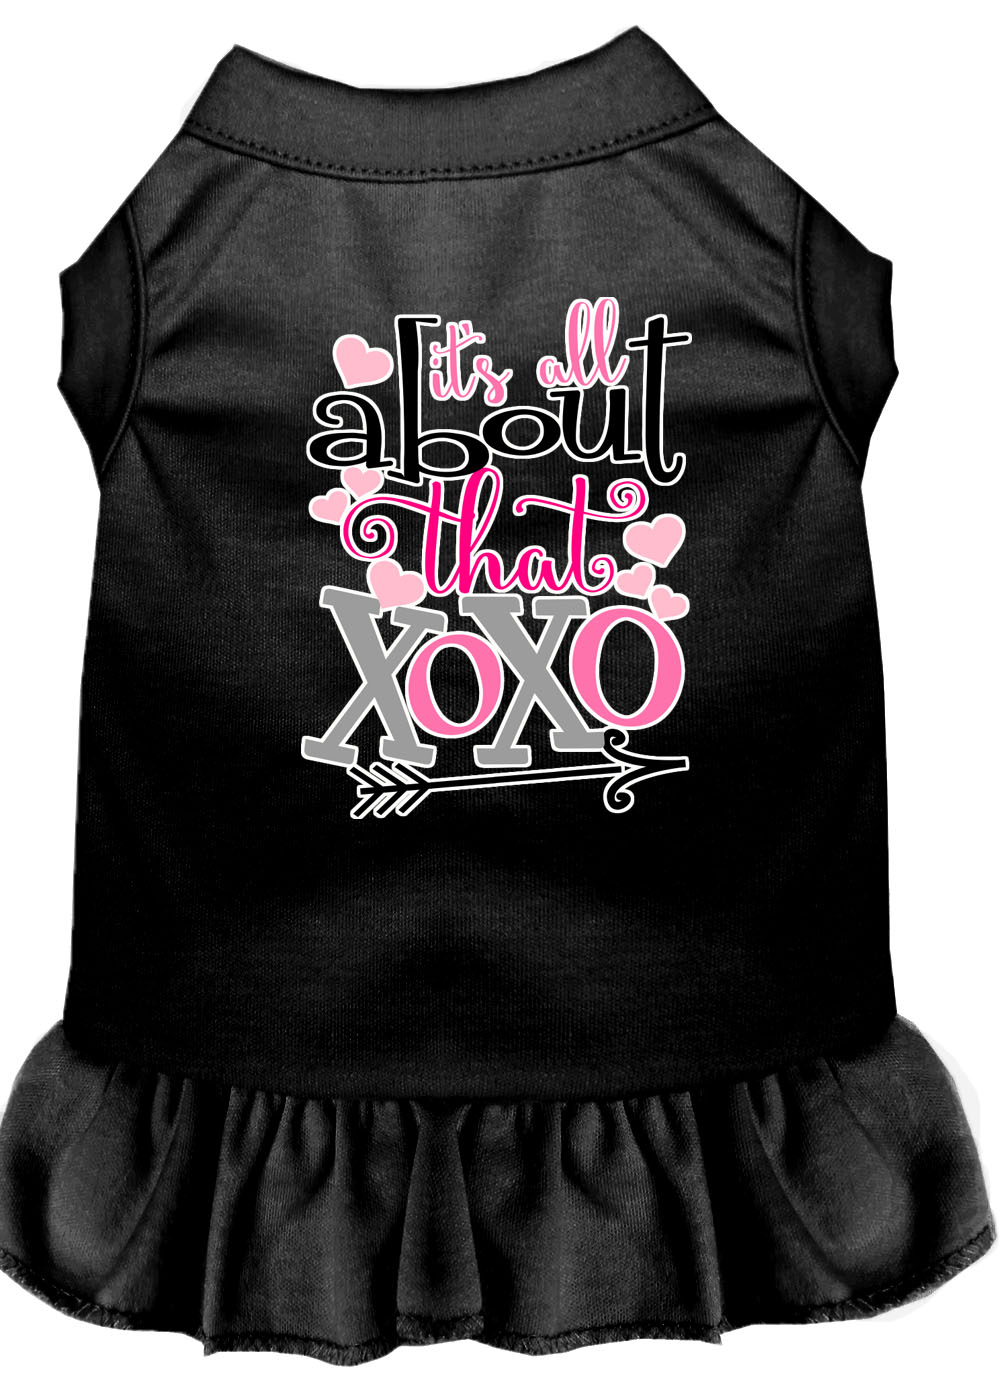 All about the XOXO Screen Print Dog Dress Black 4X